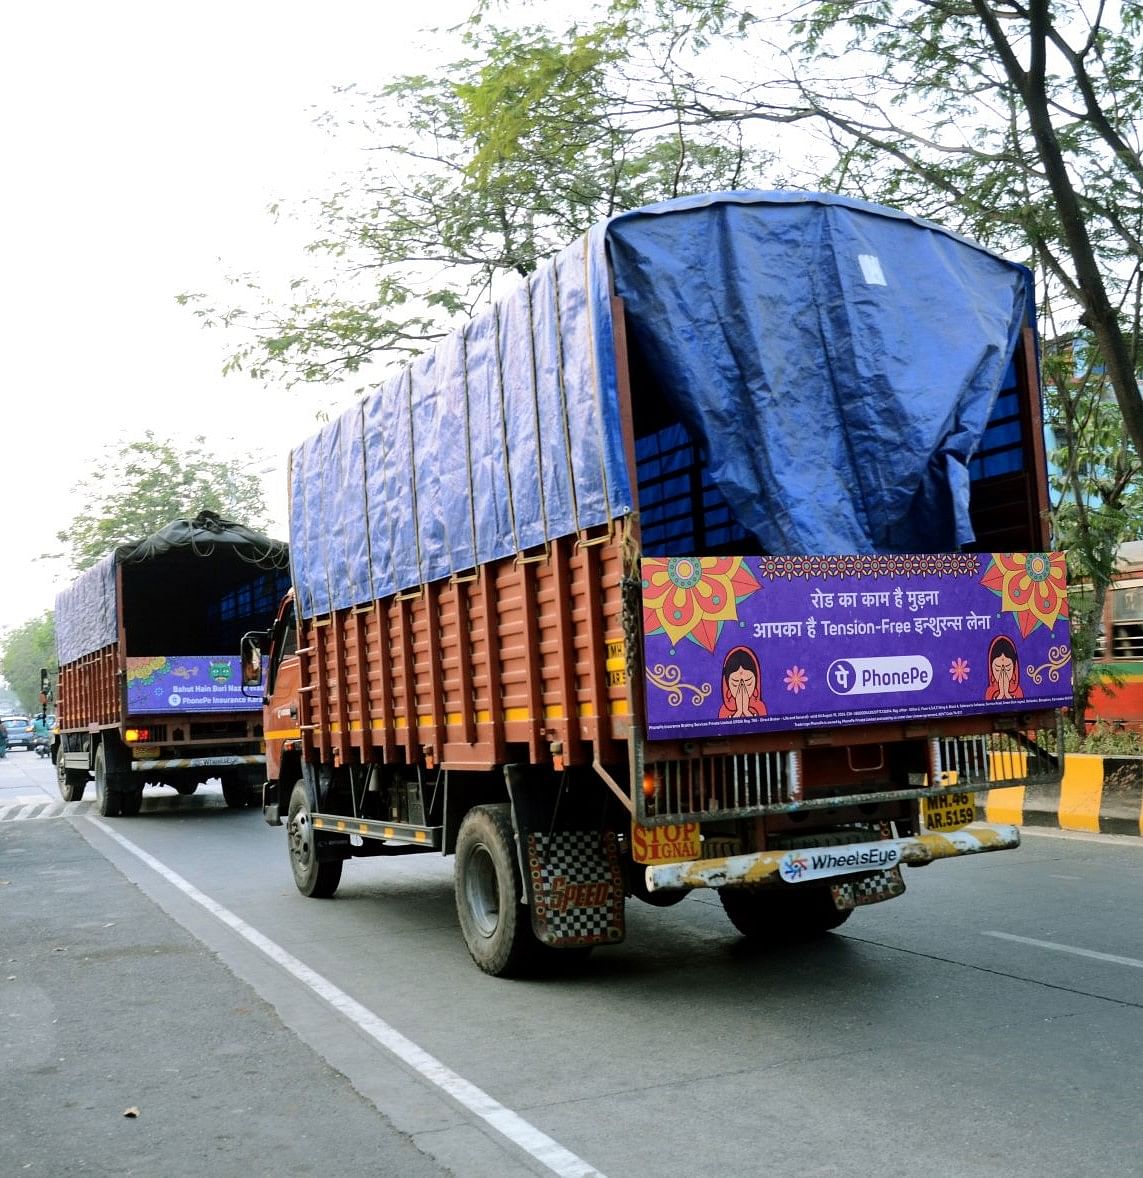 PhonePe puts catchy phrases on tailgates of trucks to promote its motor insurance products